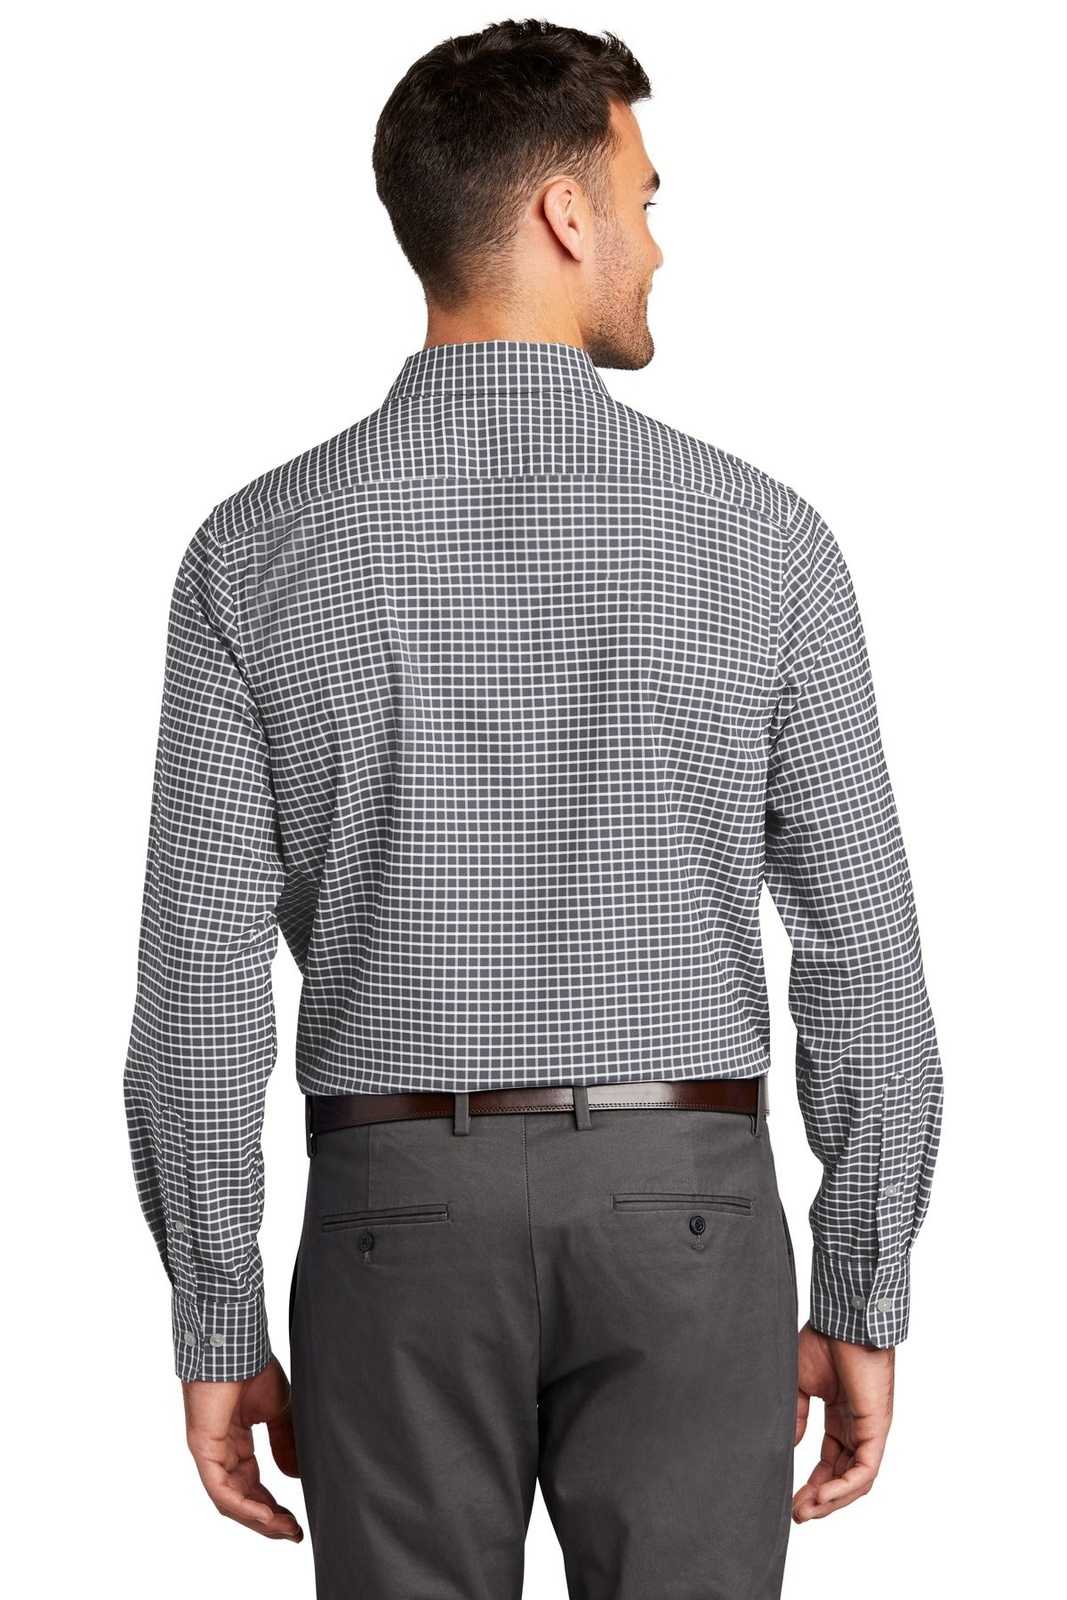 Port Authority W680 City Stretch Shirt - Graphite White - HIT a Double - 1